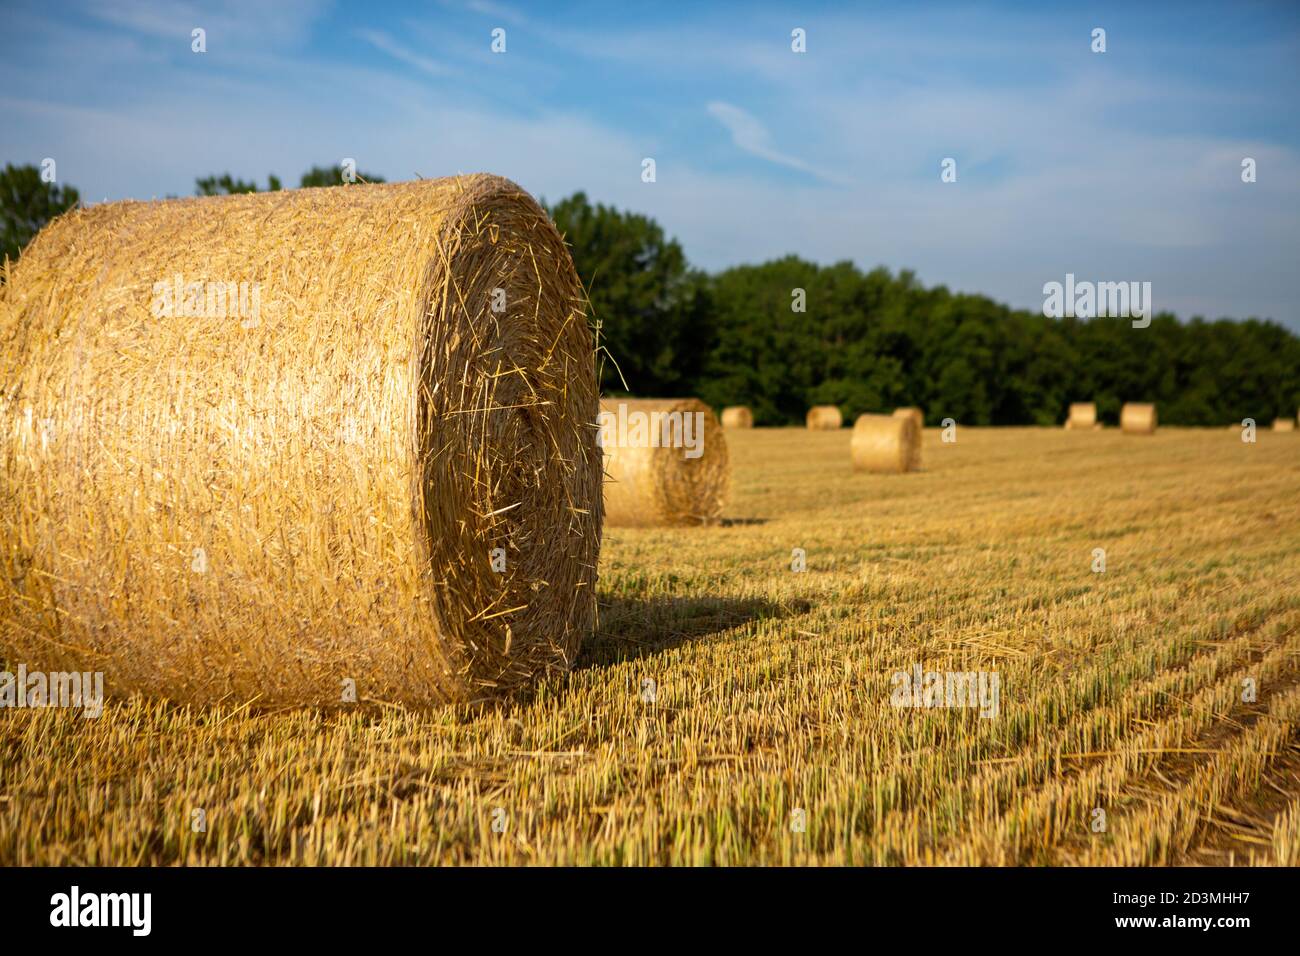 Harvested hay bales in field Stock Photo